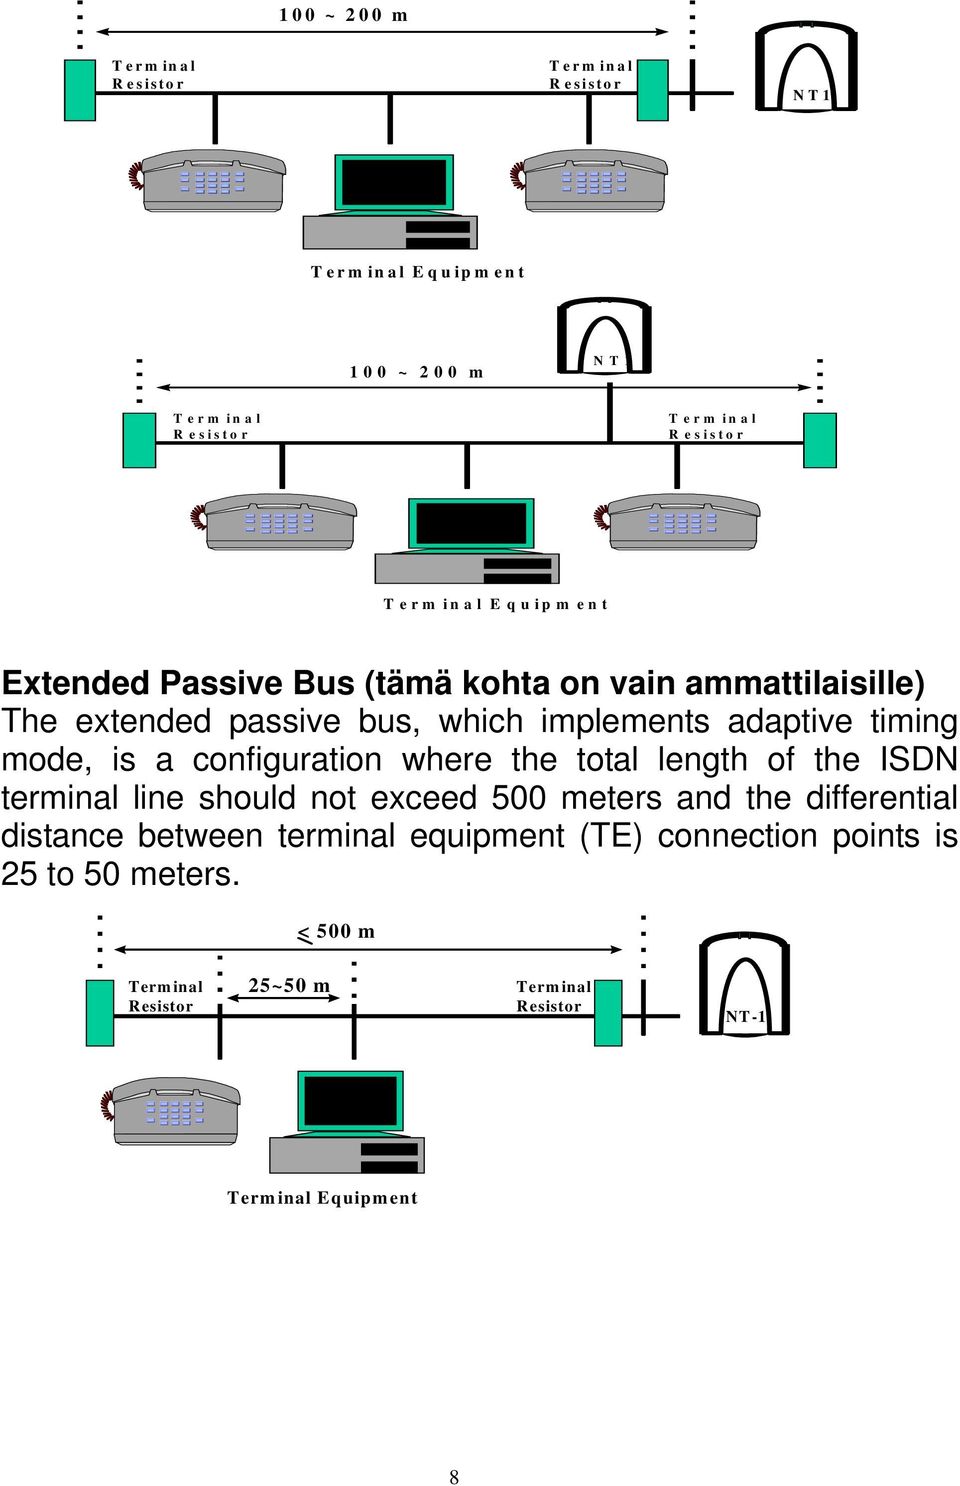 mode, is a configuration where the total length of the ISDN terminal line should not exceed 500 meters and the differential distance